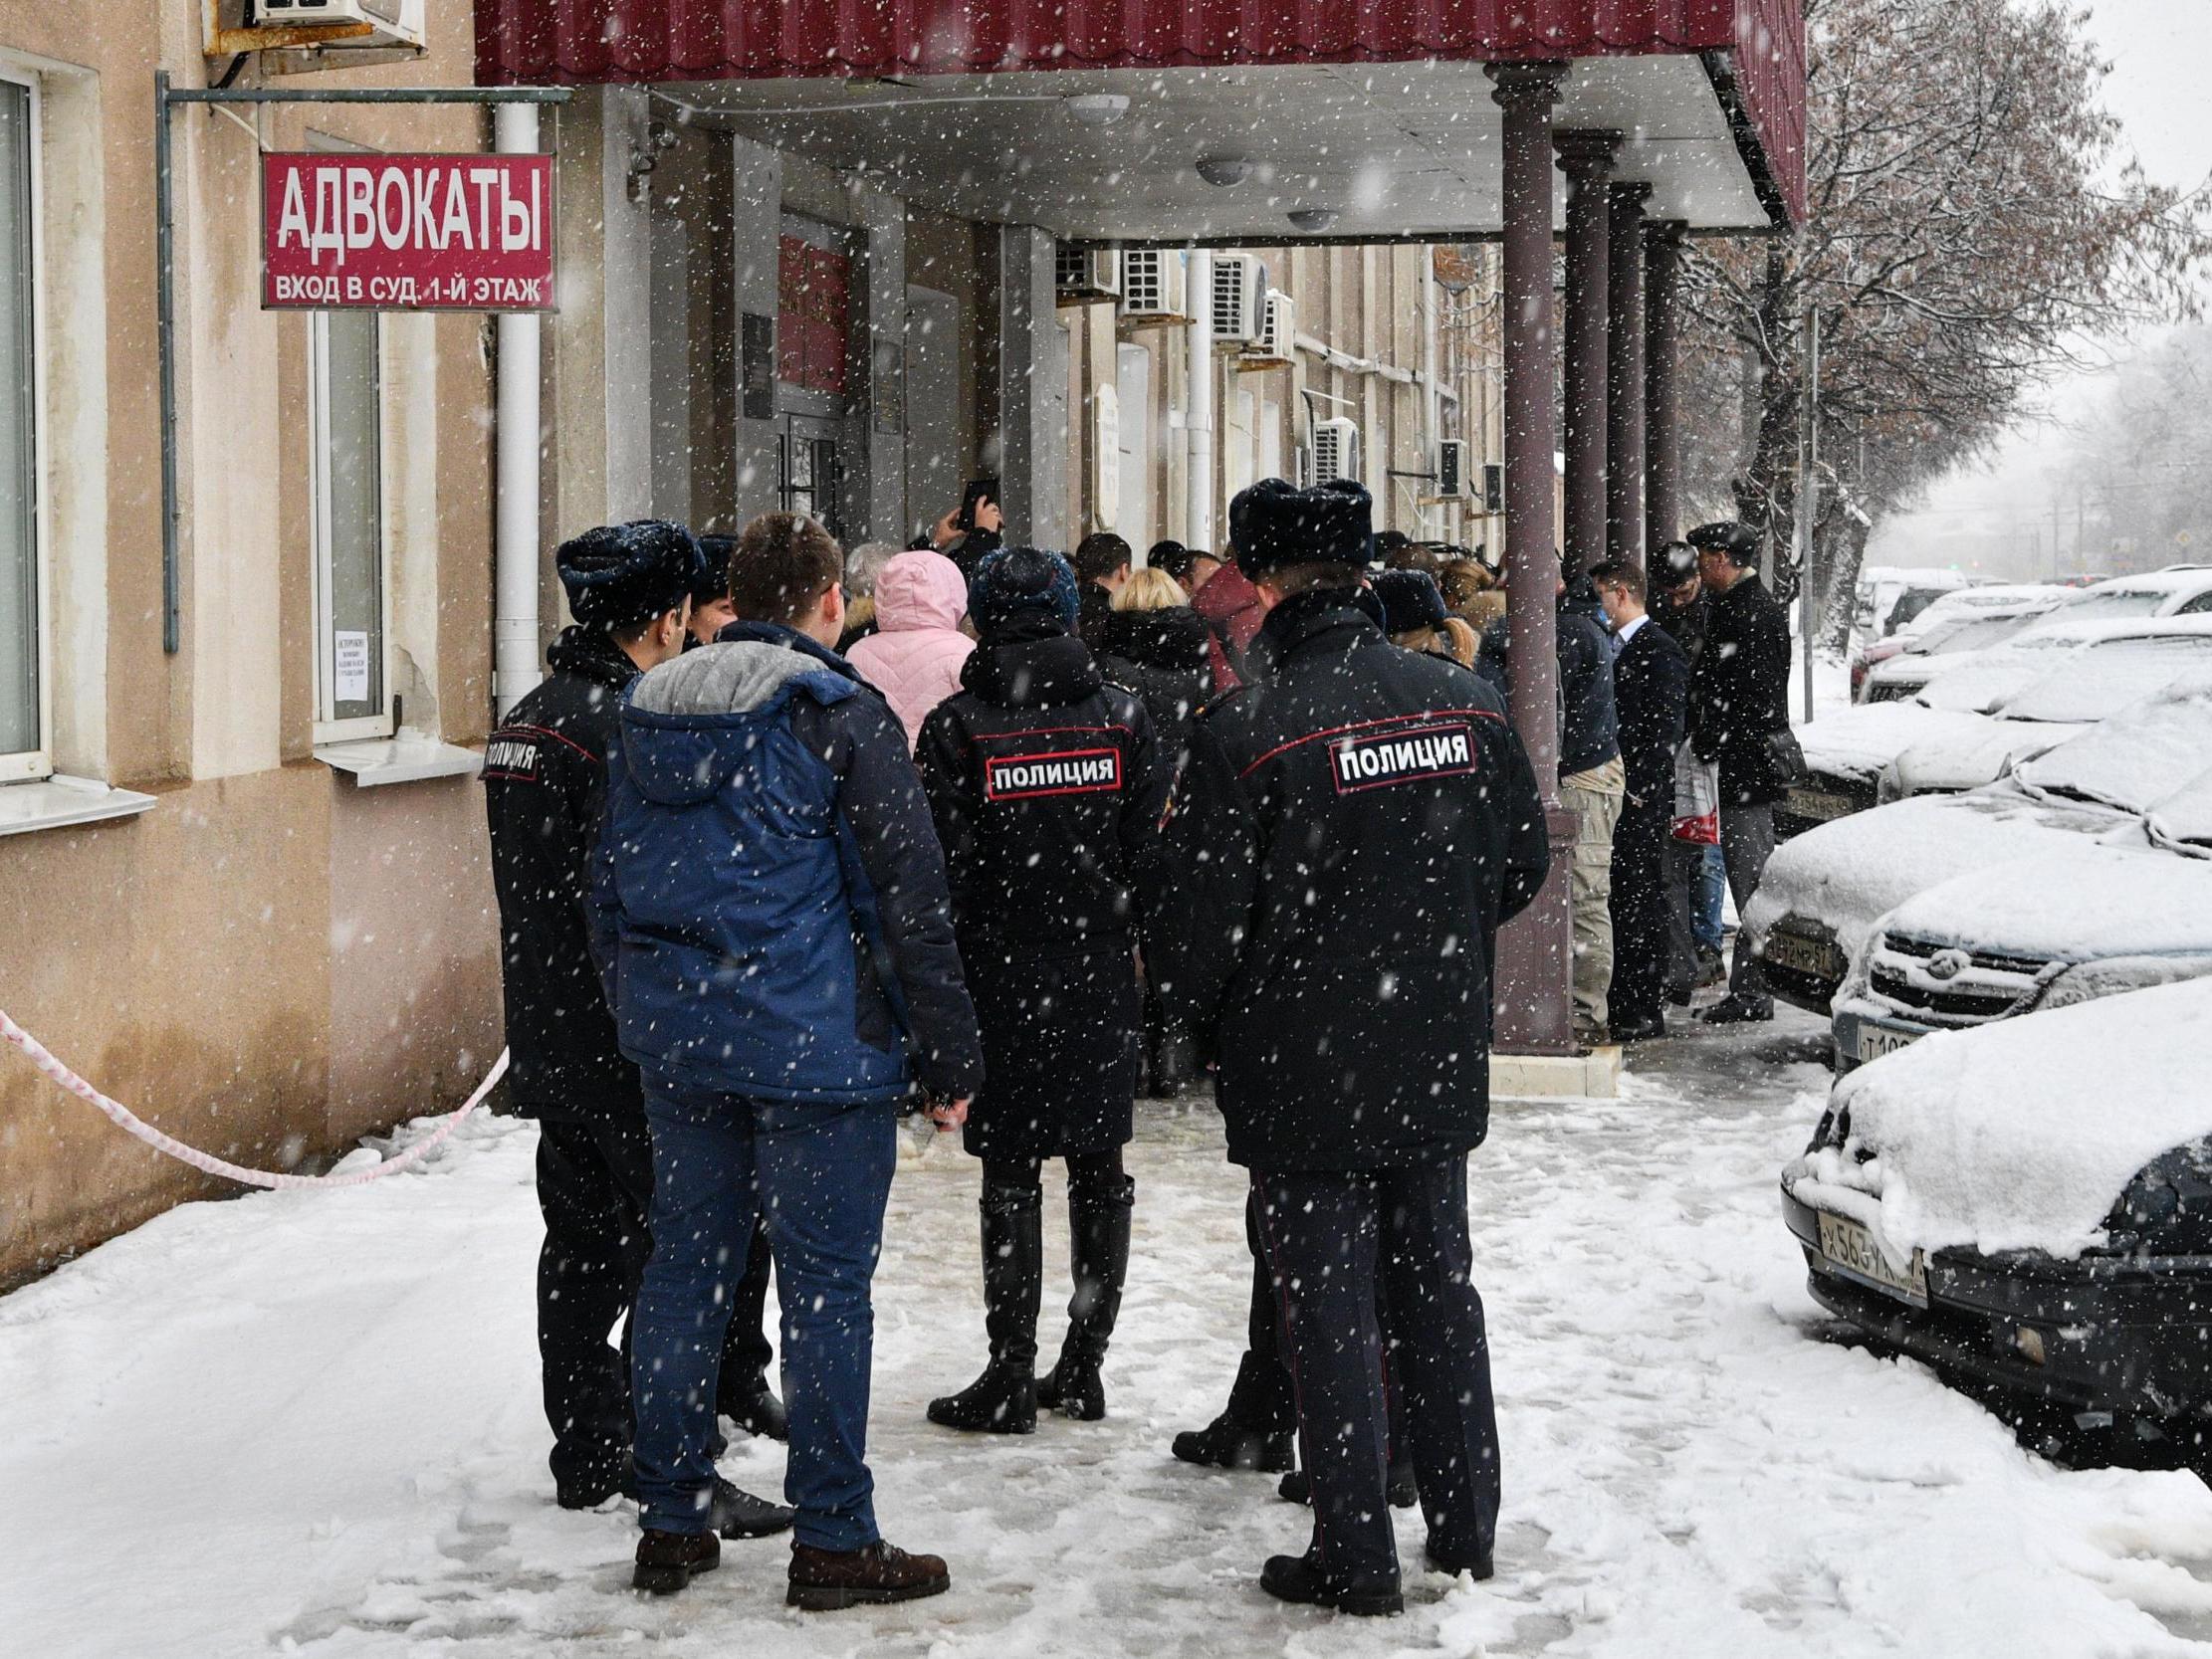 Members of the media and supporters of Dennis Christensen gather outside a courthouse after the verdict announcement in his trial, last year, in the town of Oryol 6 February 2019